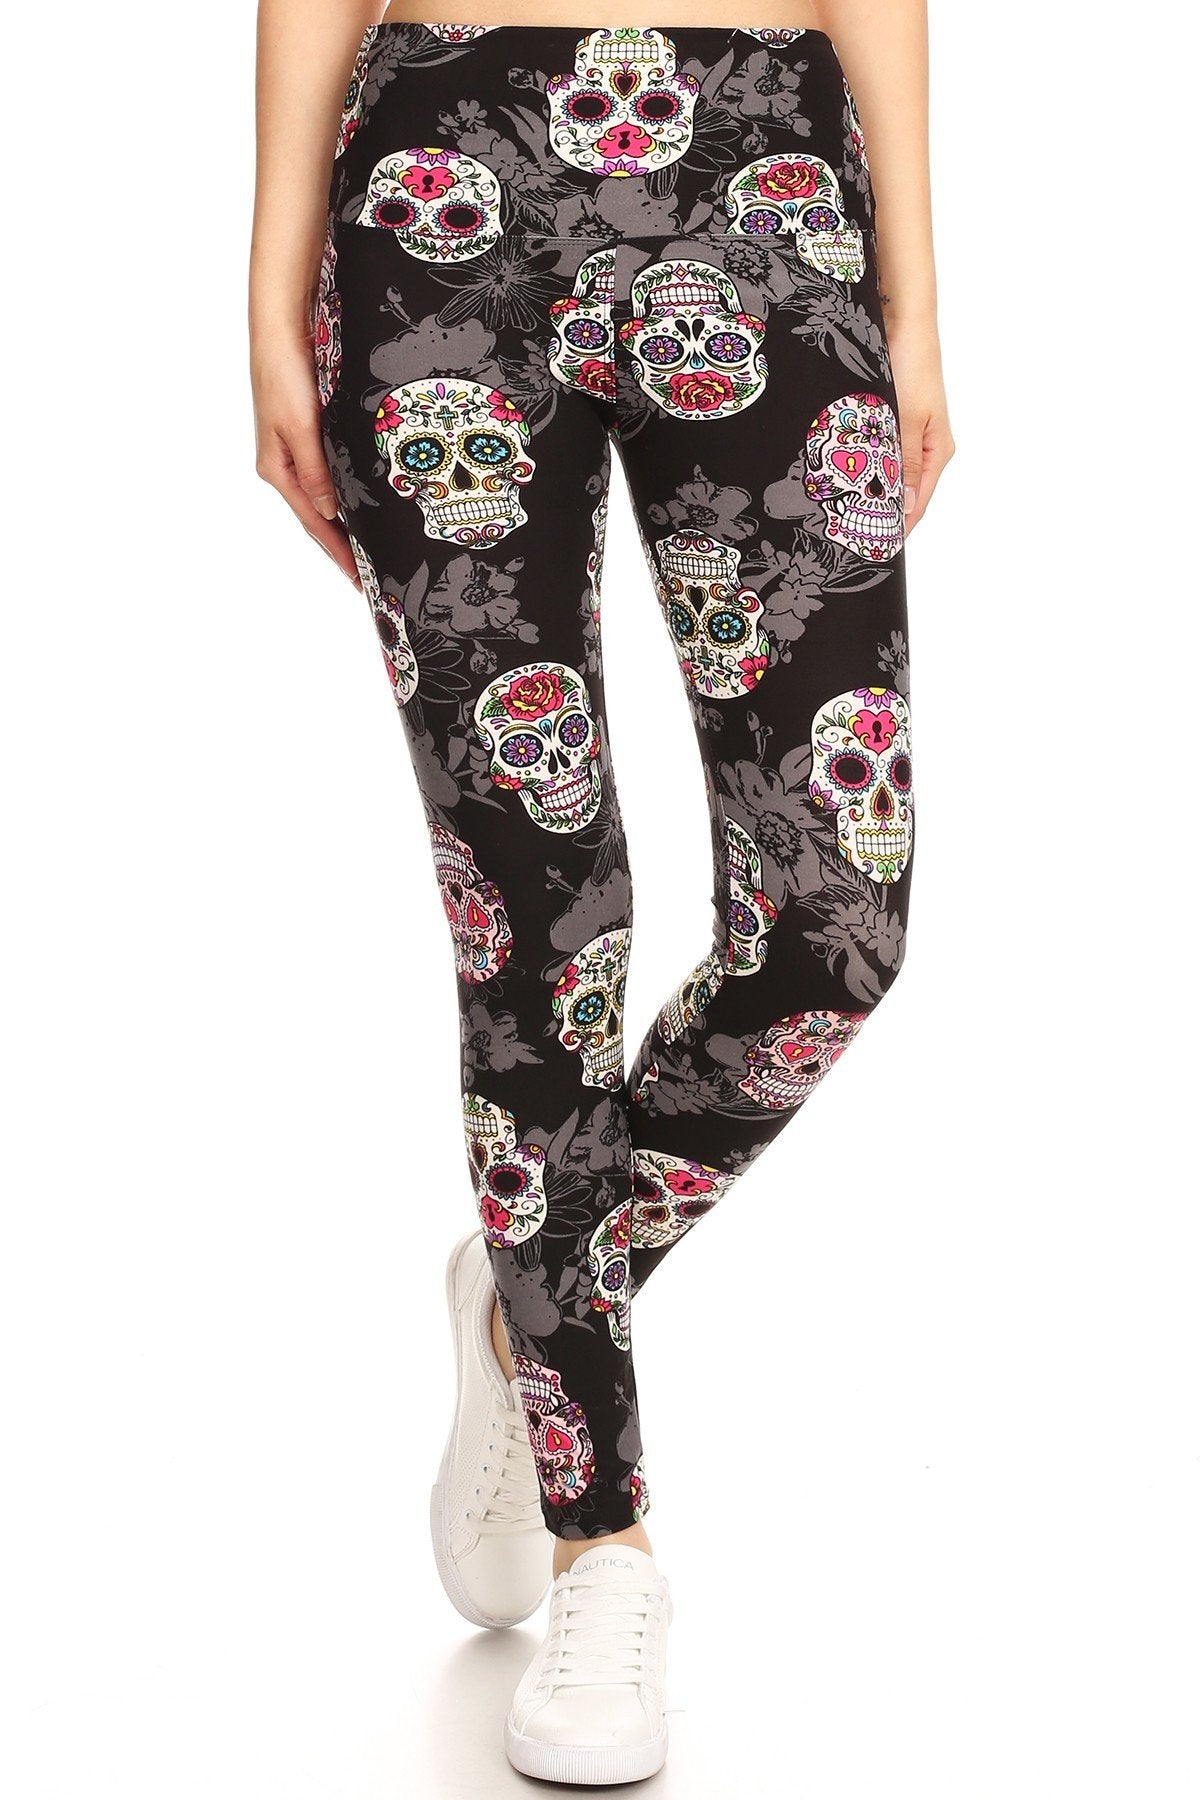 5-inch Long Yoga Style Banded Lined Skull Printed Knit Legging With High Waist